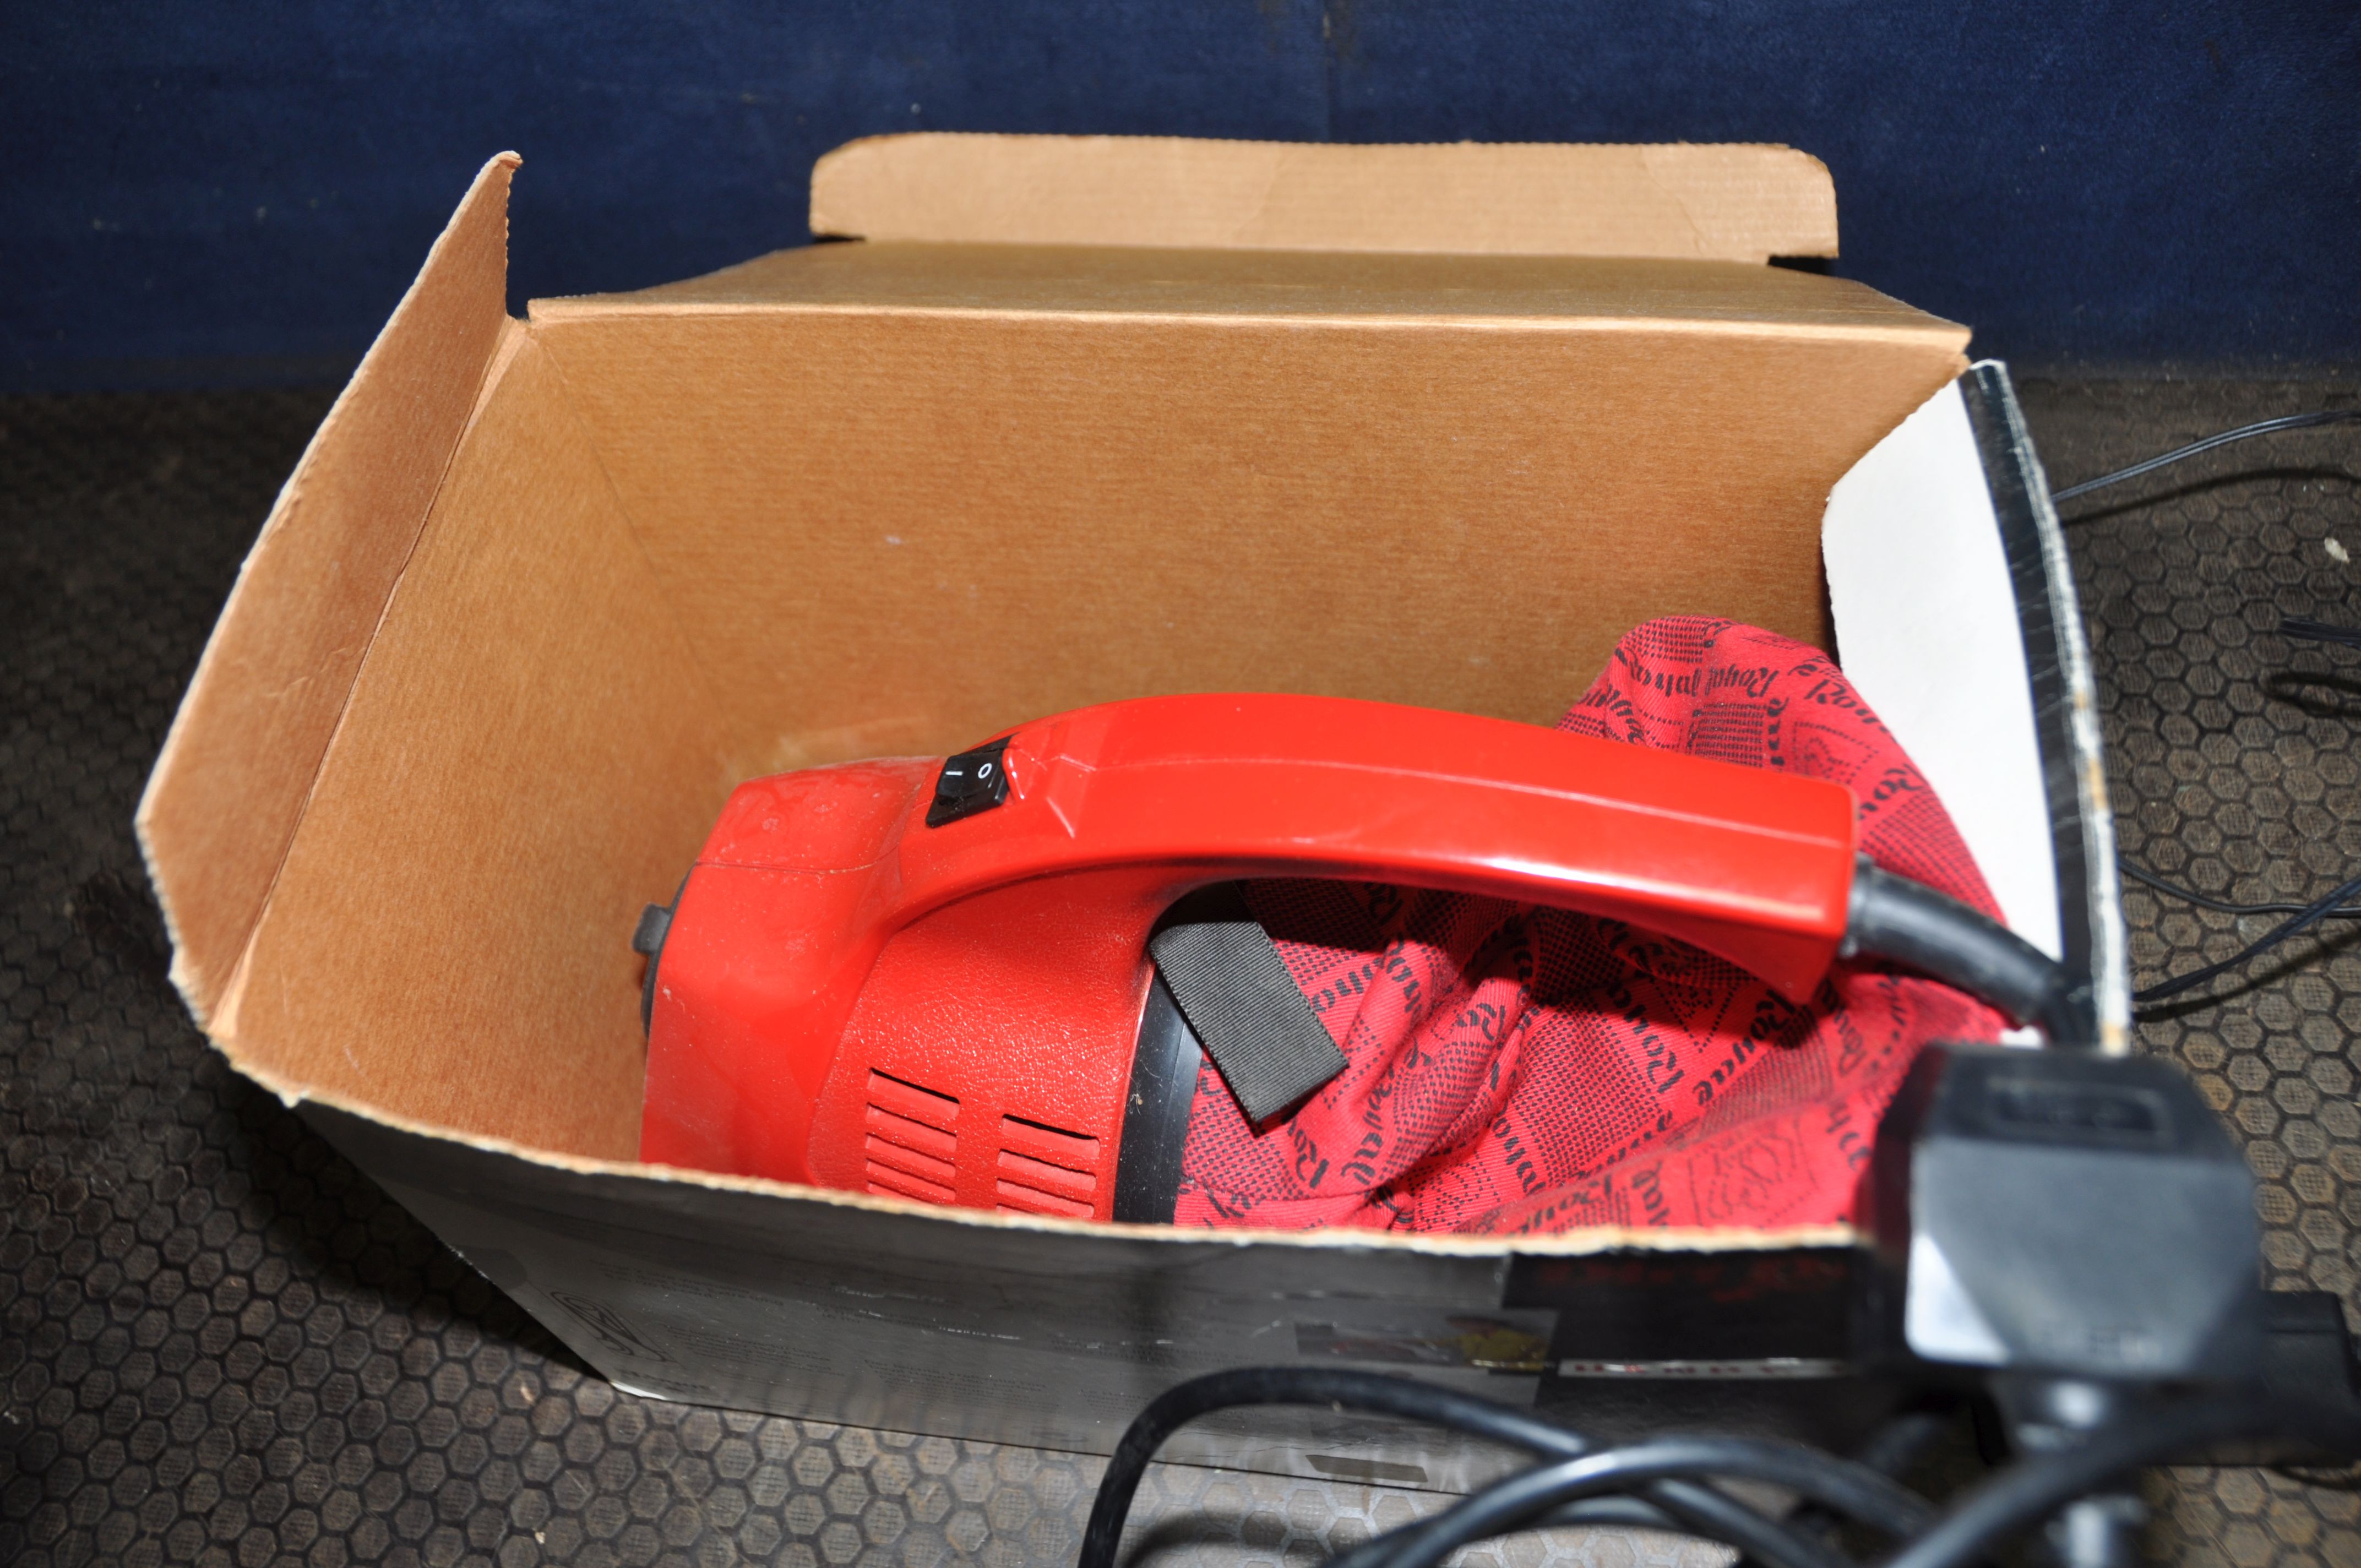 AN ARGOS UPRIGHT VACUUM CLEANER, a Dirt Devil handheld vacuum cleaner, a Prem I Air heated towel - Image 3 of 3